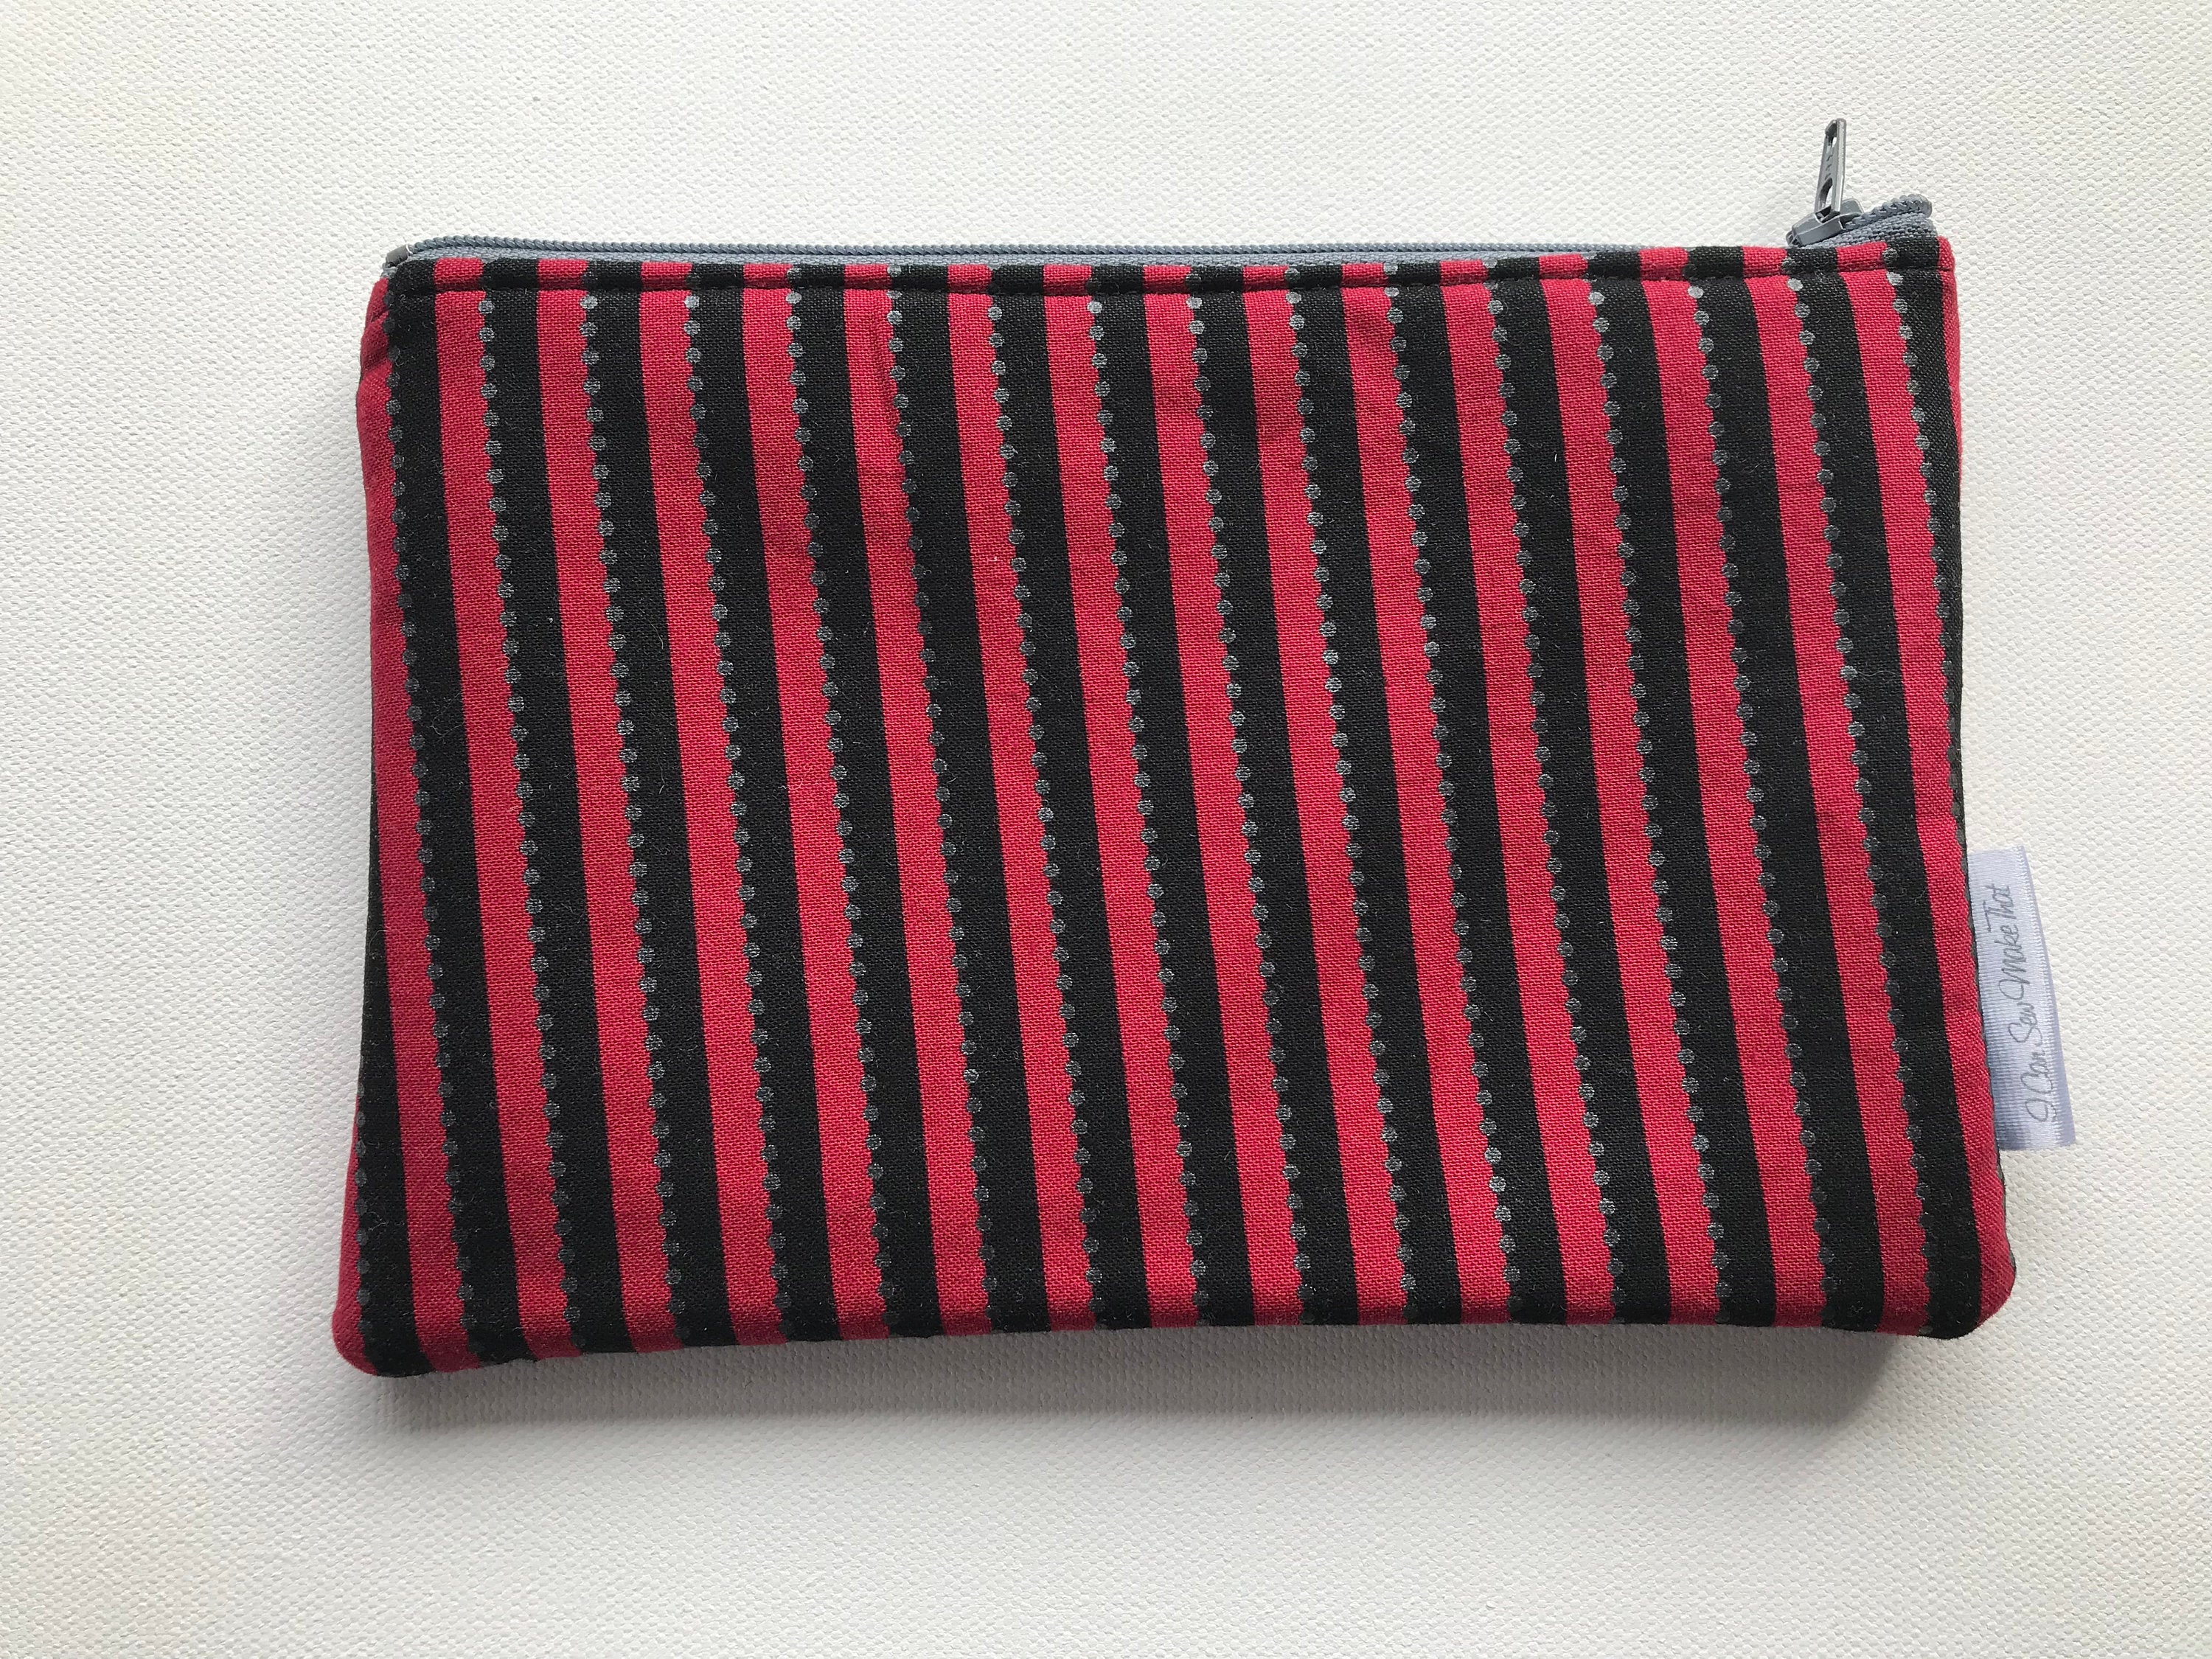 Notion Pouch - Red/black stripes